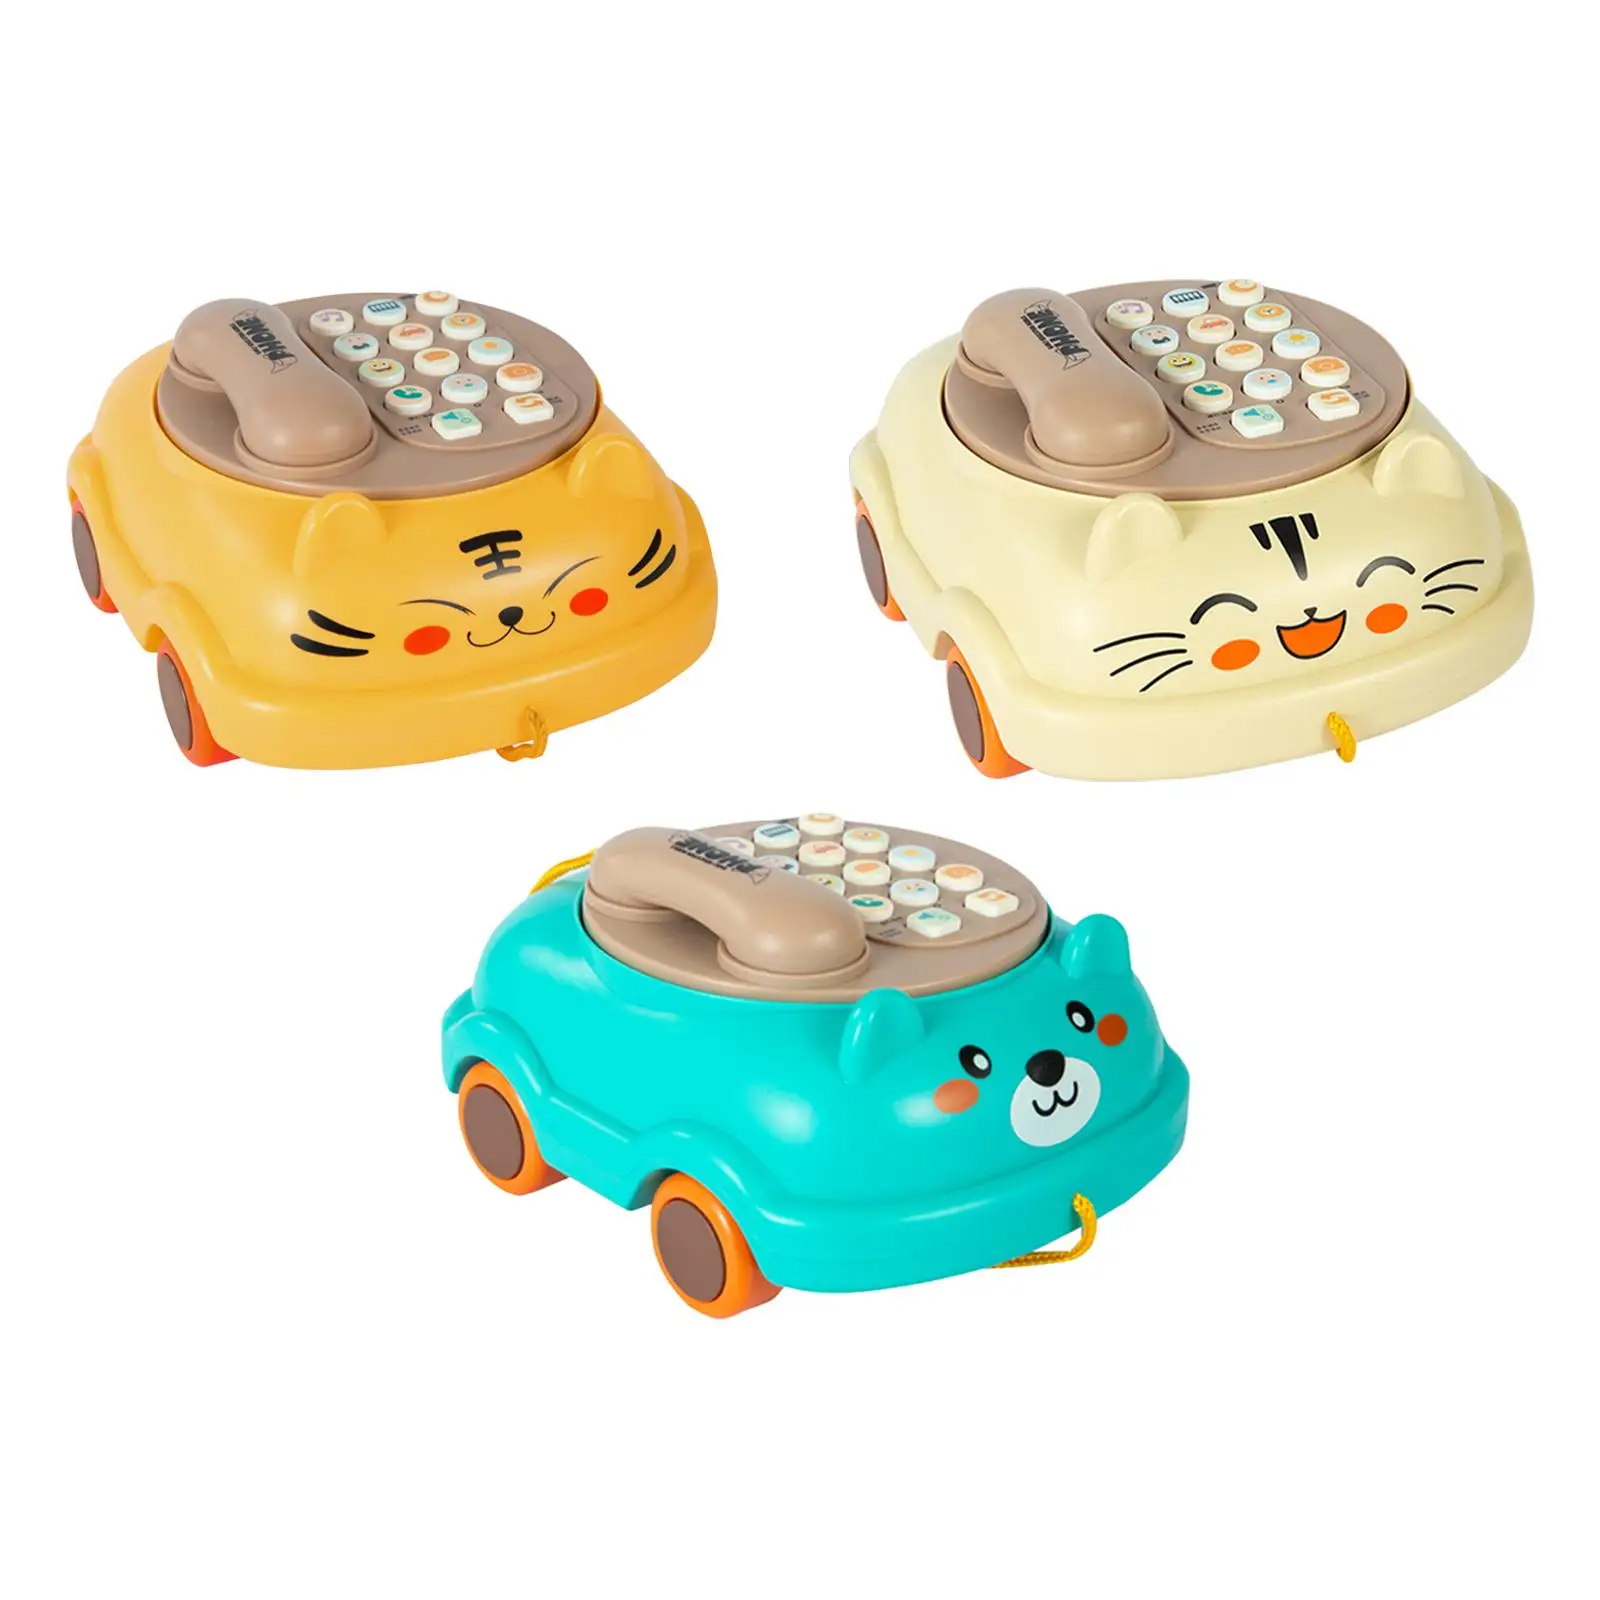 Cognitive Development Toy Lights Musical Montessori Baby Musical Toy Pretend Phone for Children Early Education Gift Boy Girl